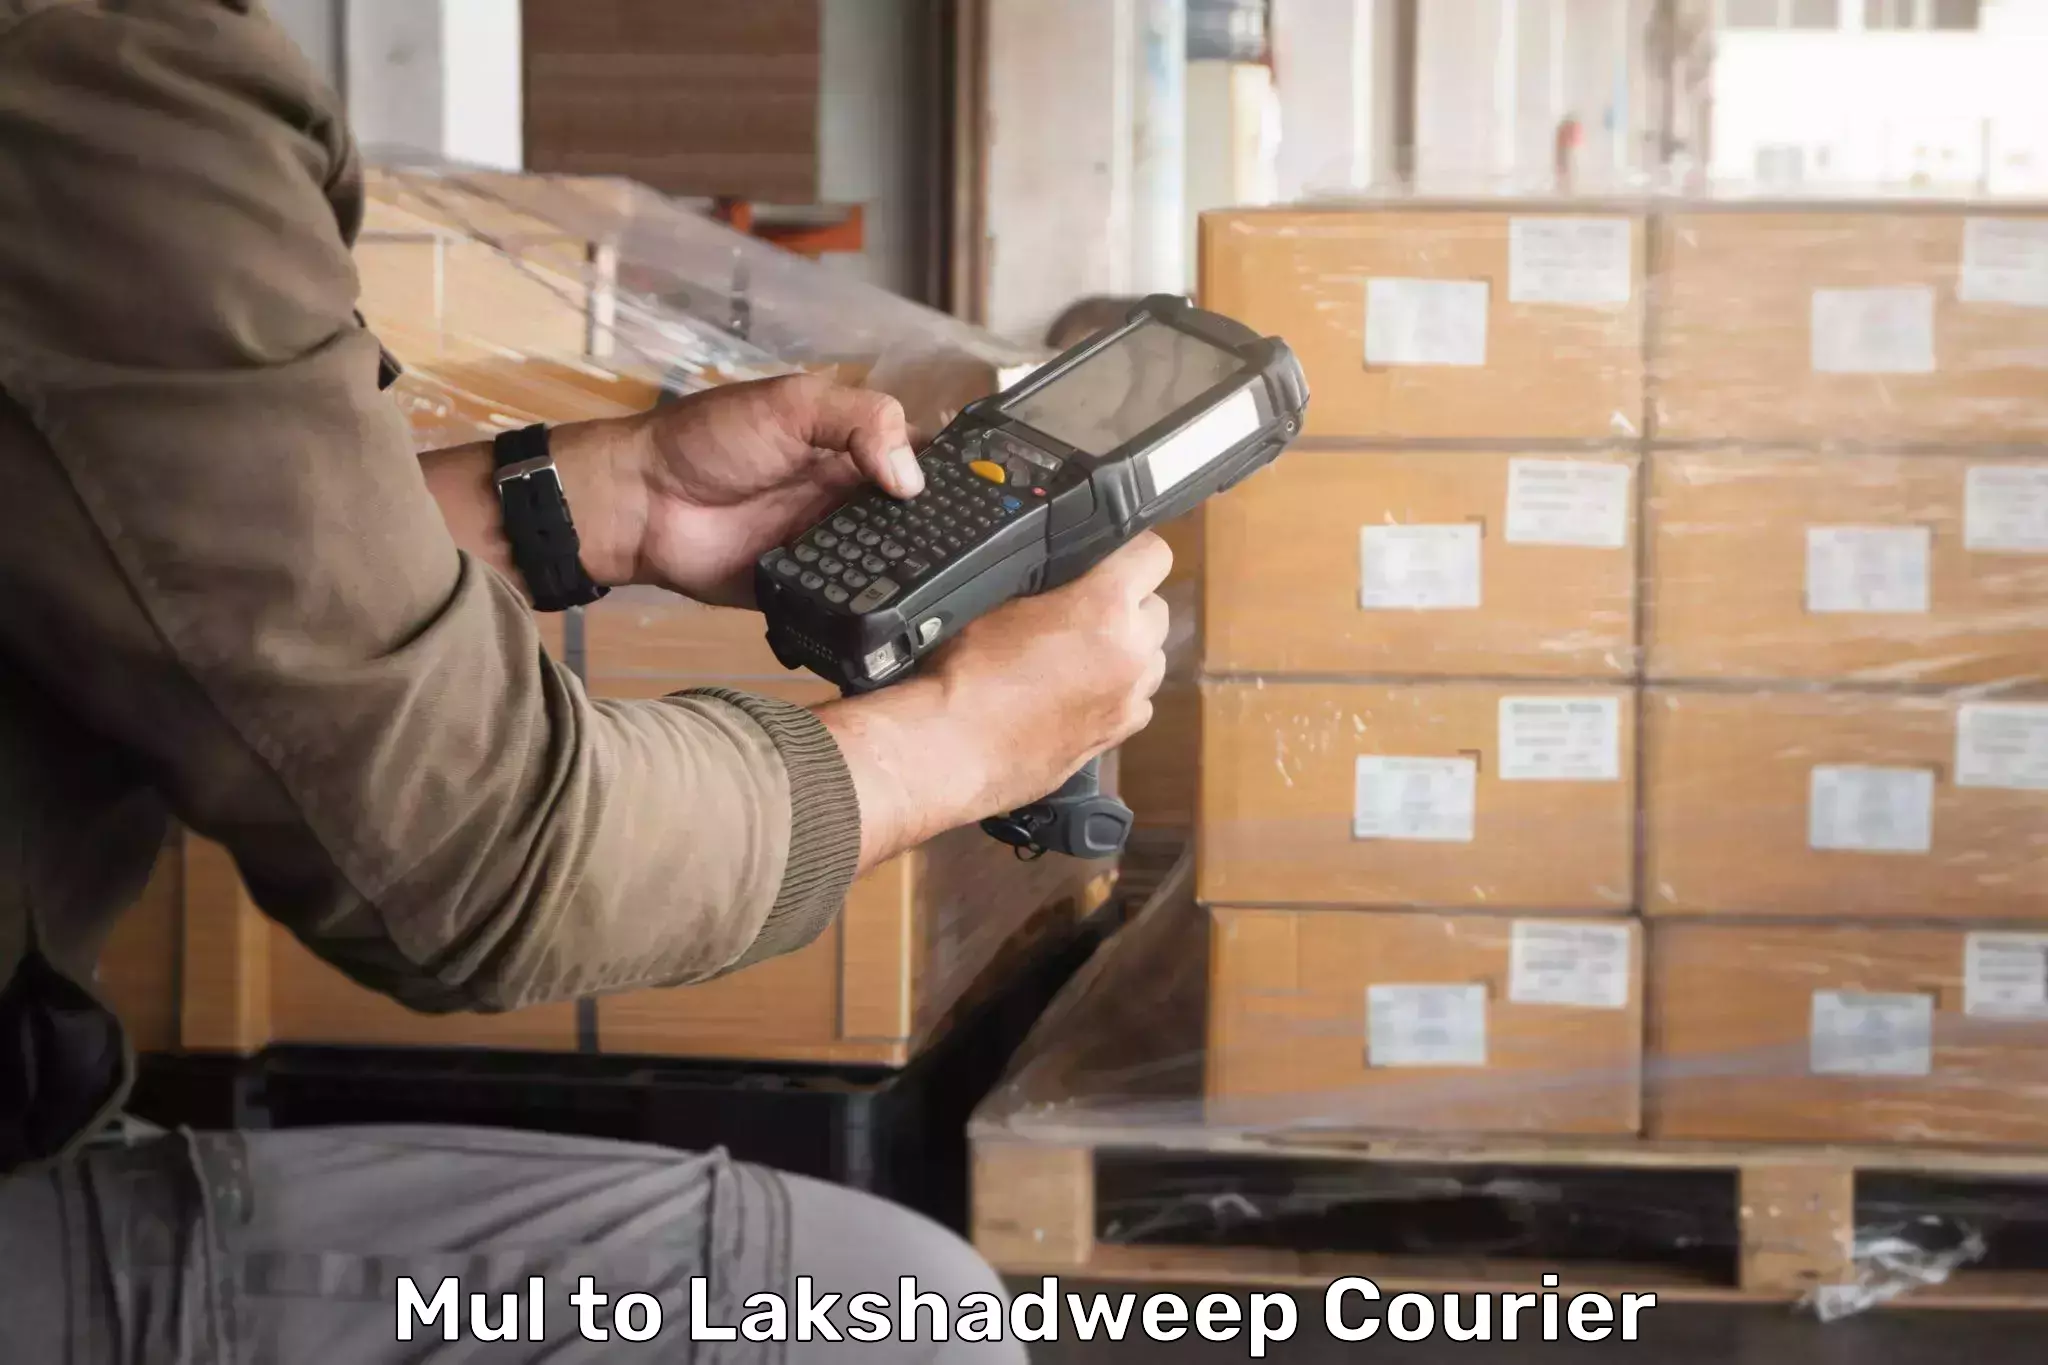 24/7 courier service Mul to Lakshadweep